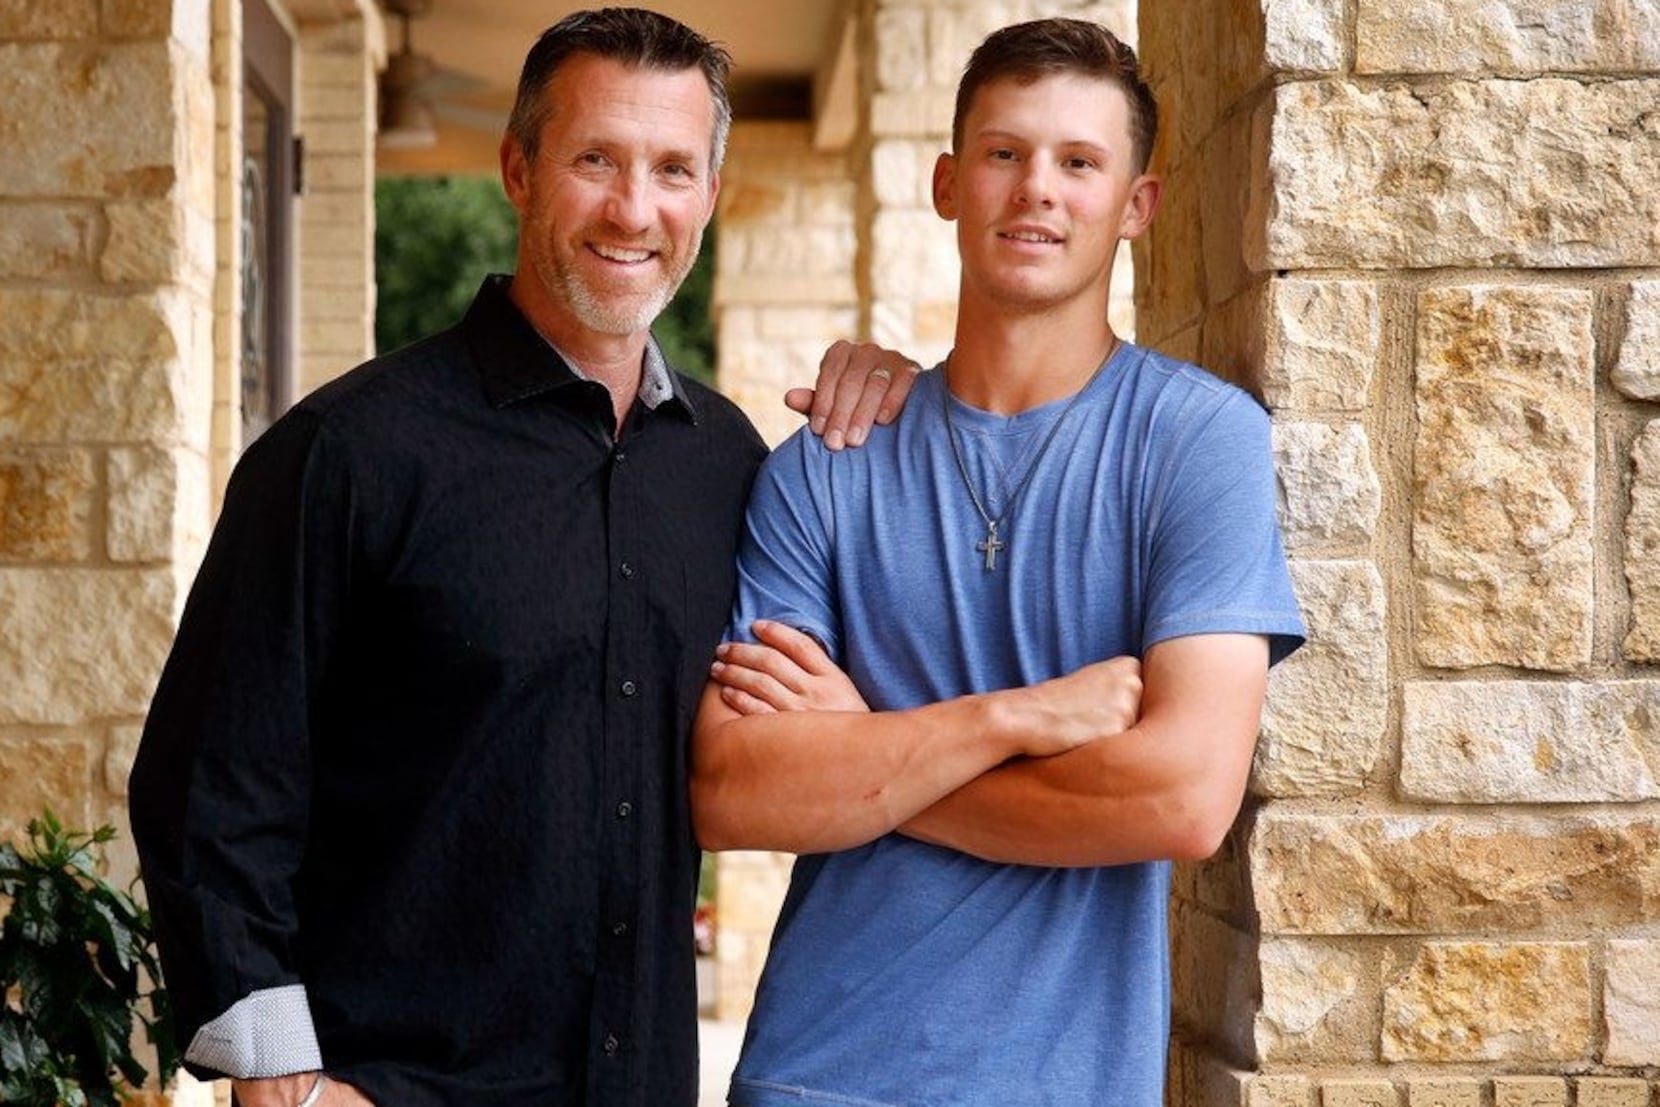 Son of former Ranger Bobby Witt follows his father's path